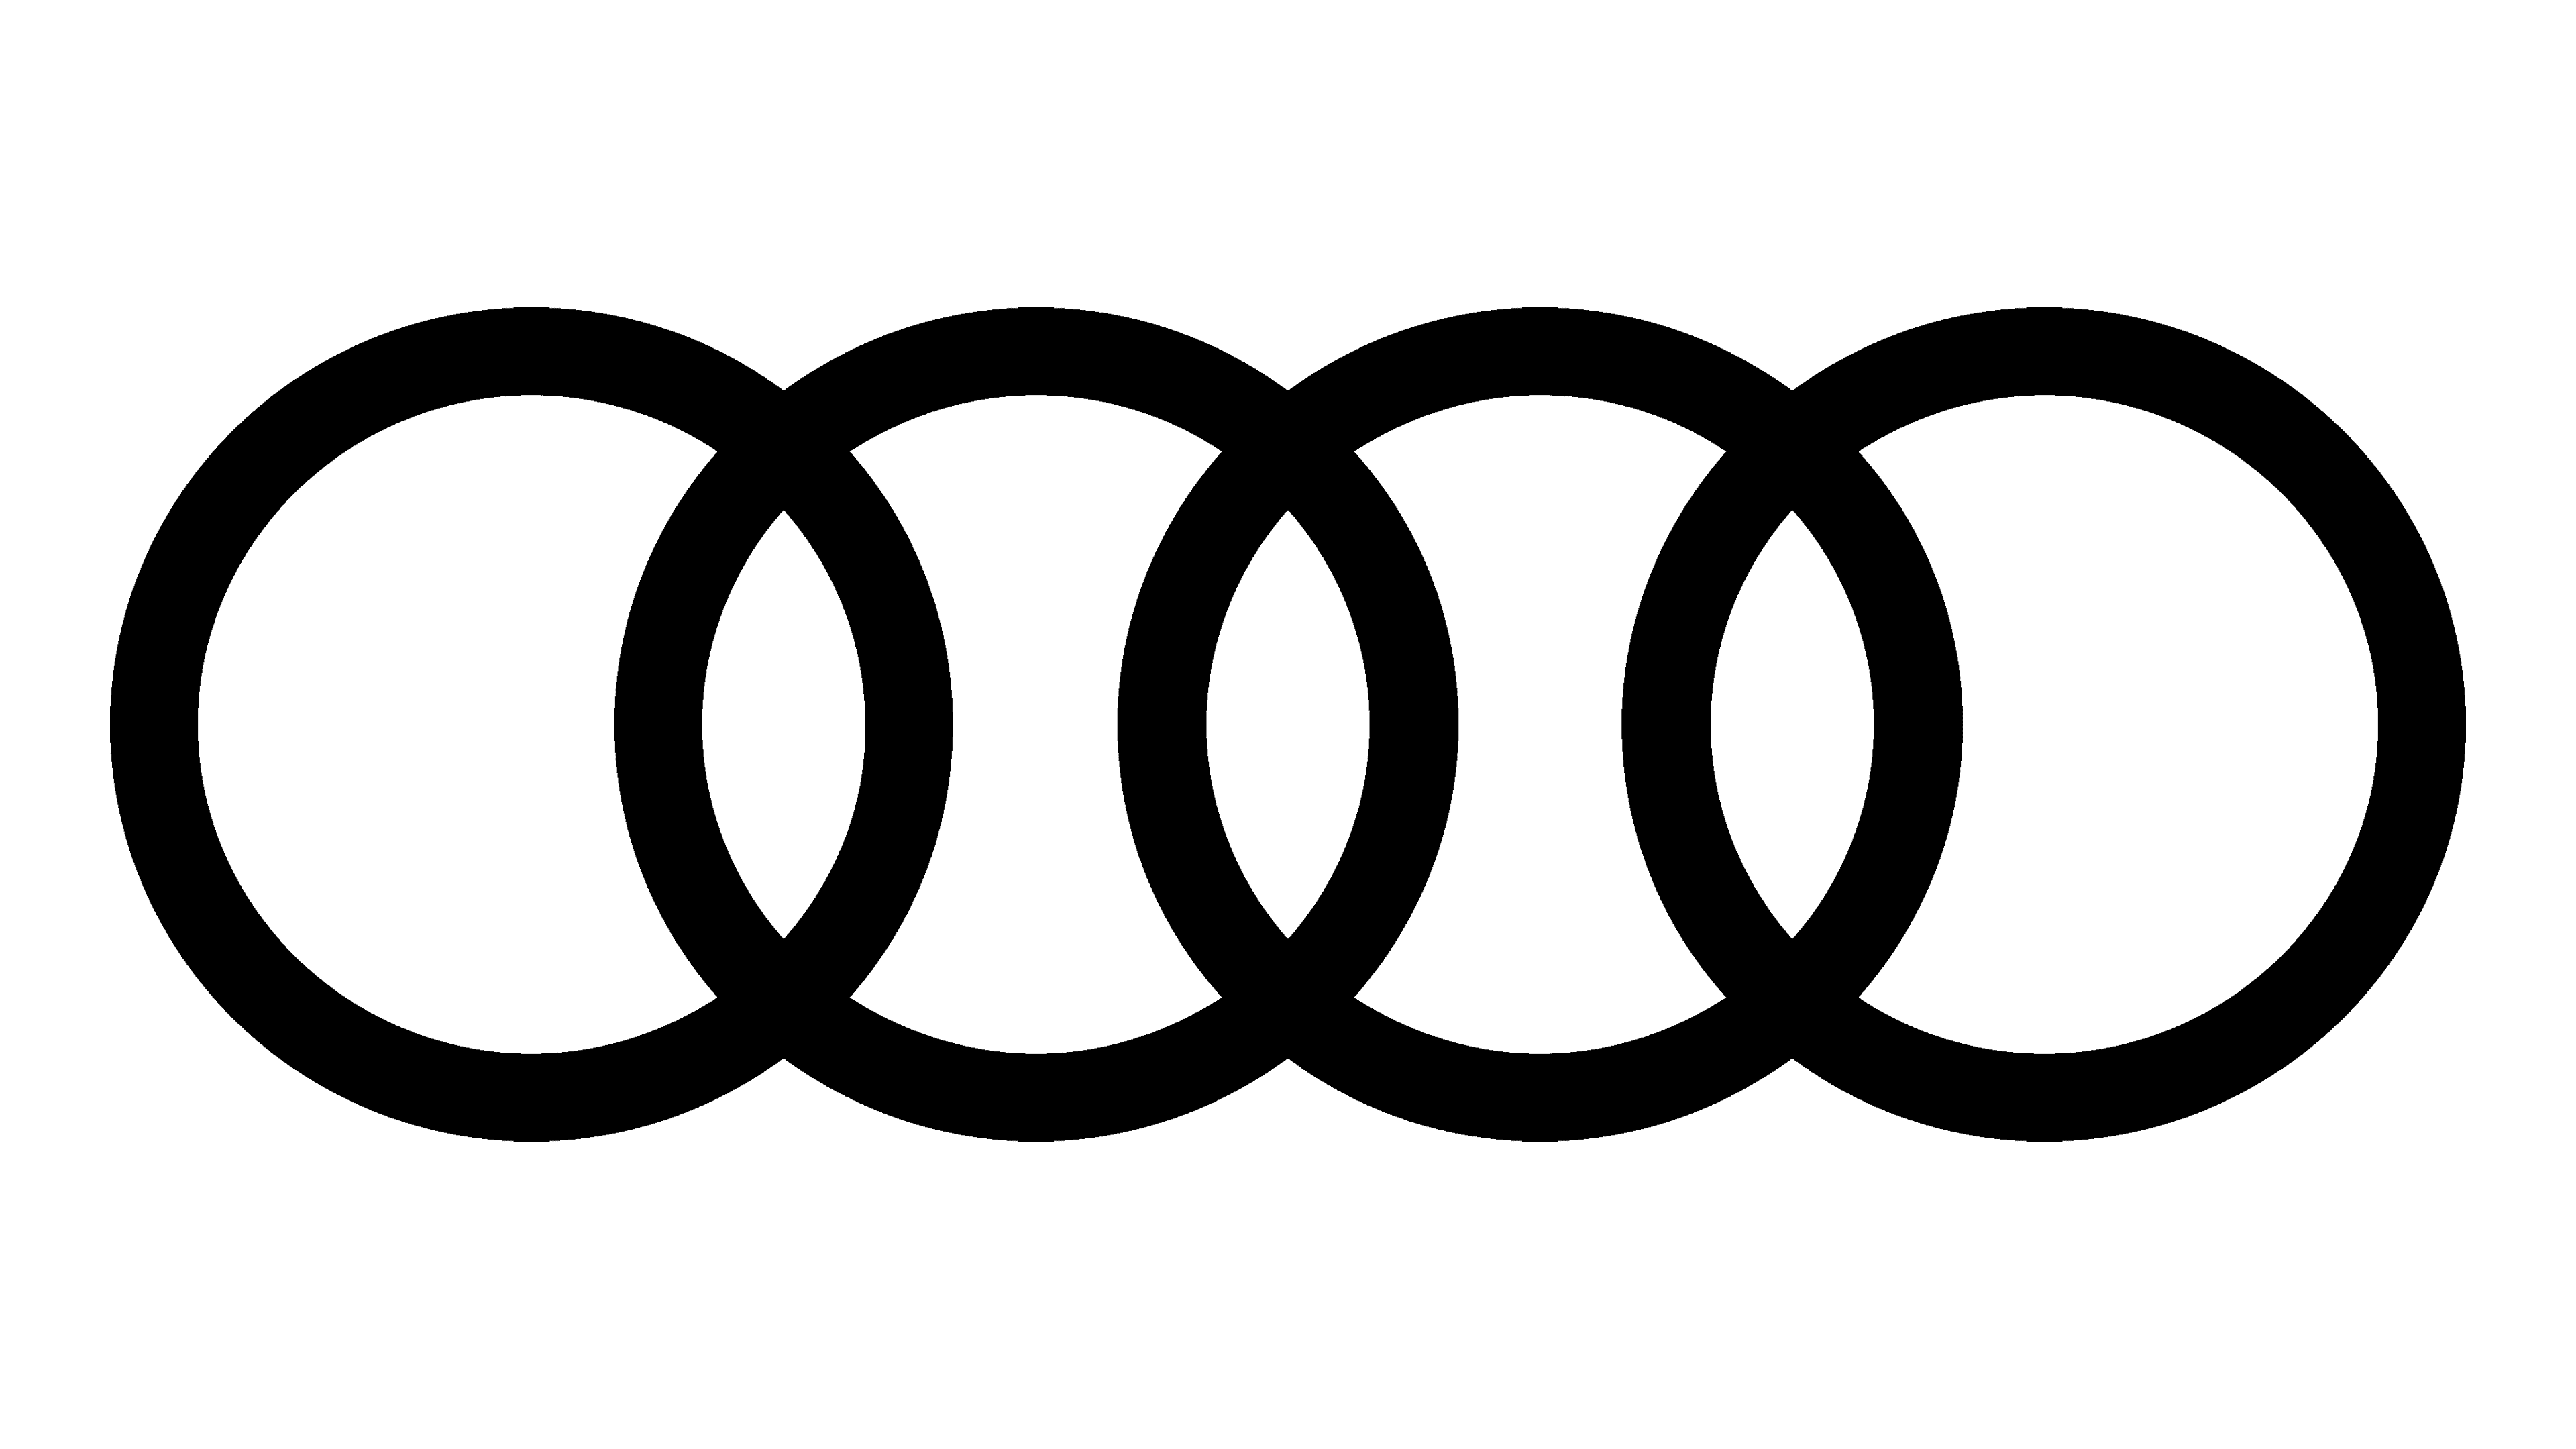 Audi Logo Meaning and History [Audi symbol]